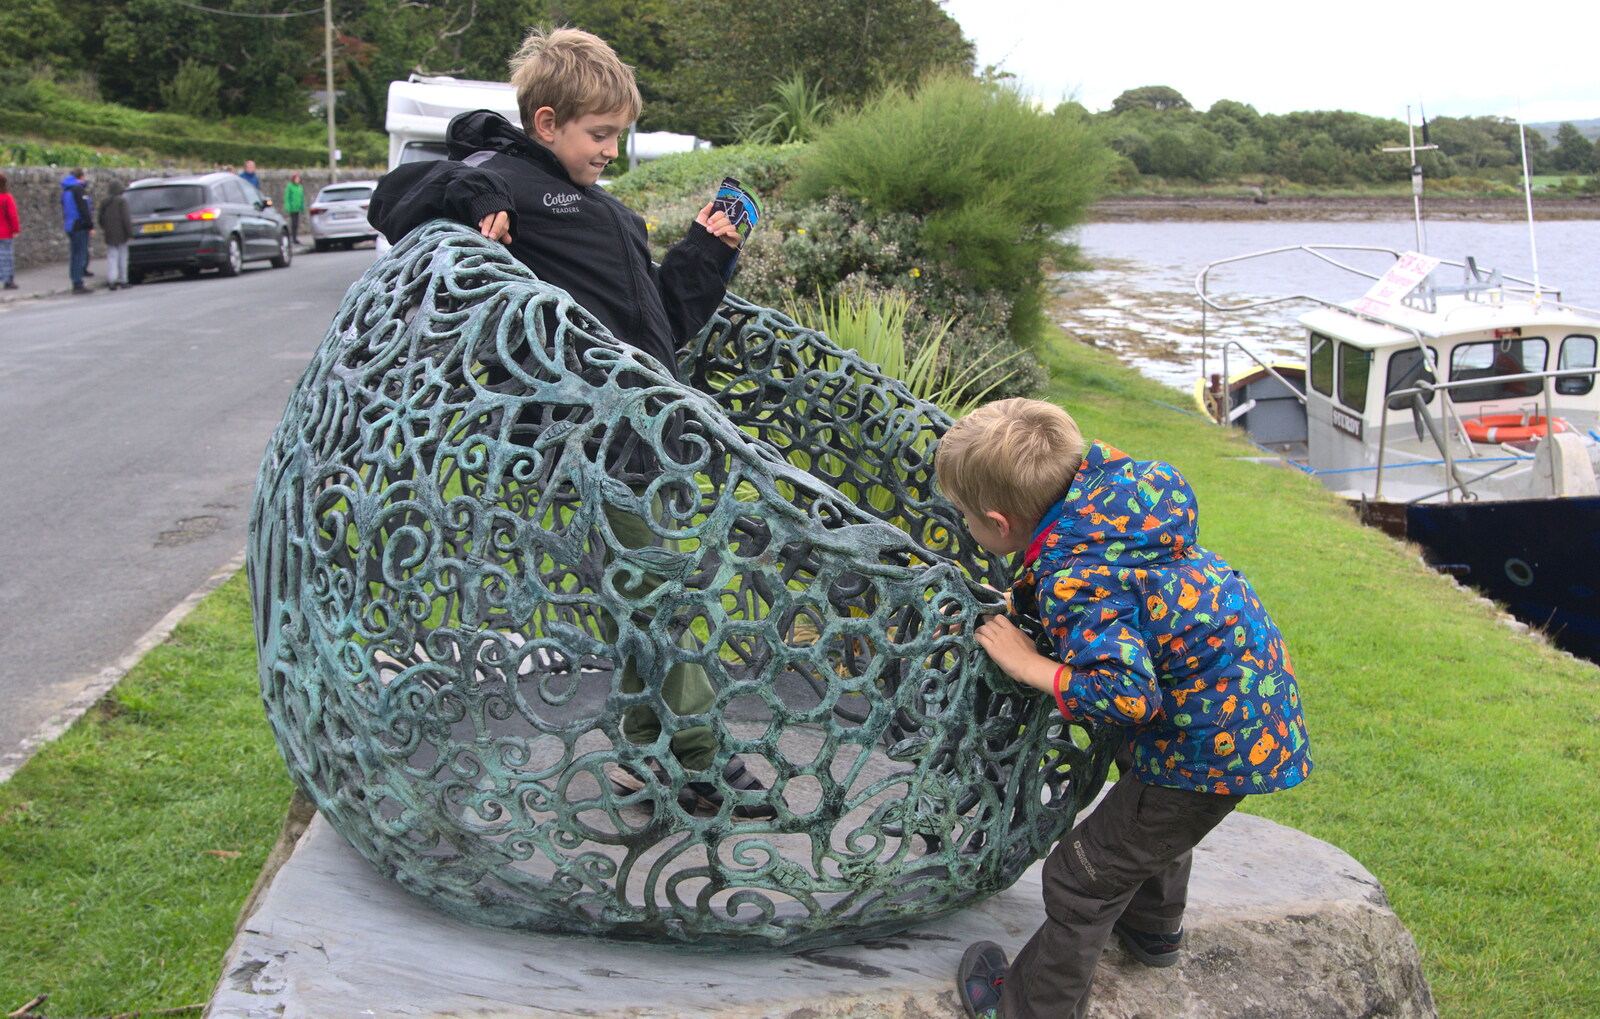 The boys interact with some sculpture from A Seafari Boat Trip, Kenmare, Kerry, Ireland - 3rd August 2017